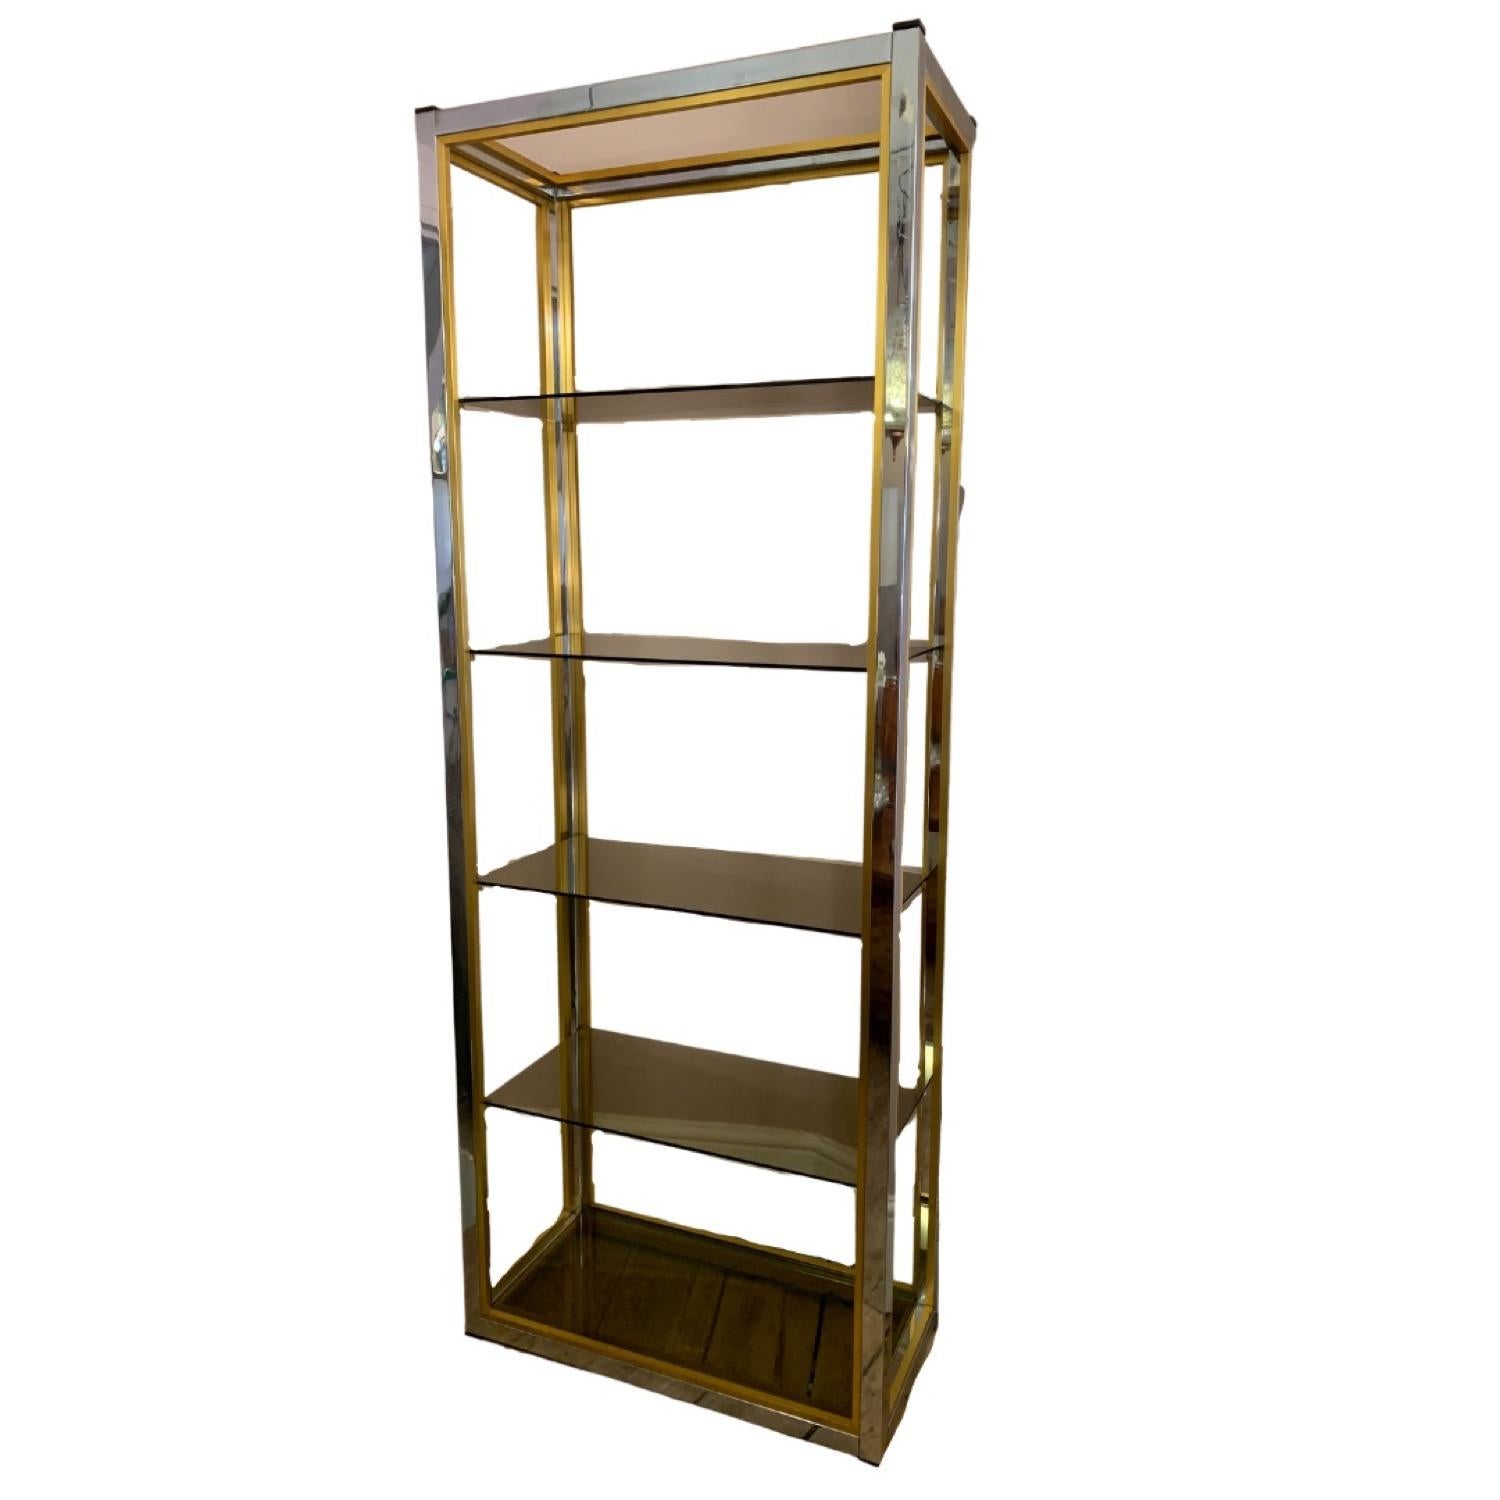 1970s brass and chrome tall and slim anodised chromed brass and chrome bookcase or etagere. Designed by Renato Zevi in a Hollywood Regency style. The original 5 smoked glass shelves which are all in very good condition with no chips or cracks. The